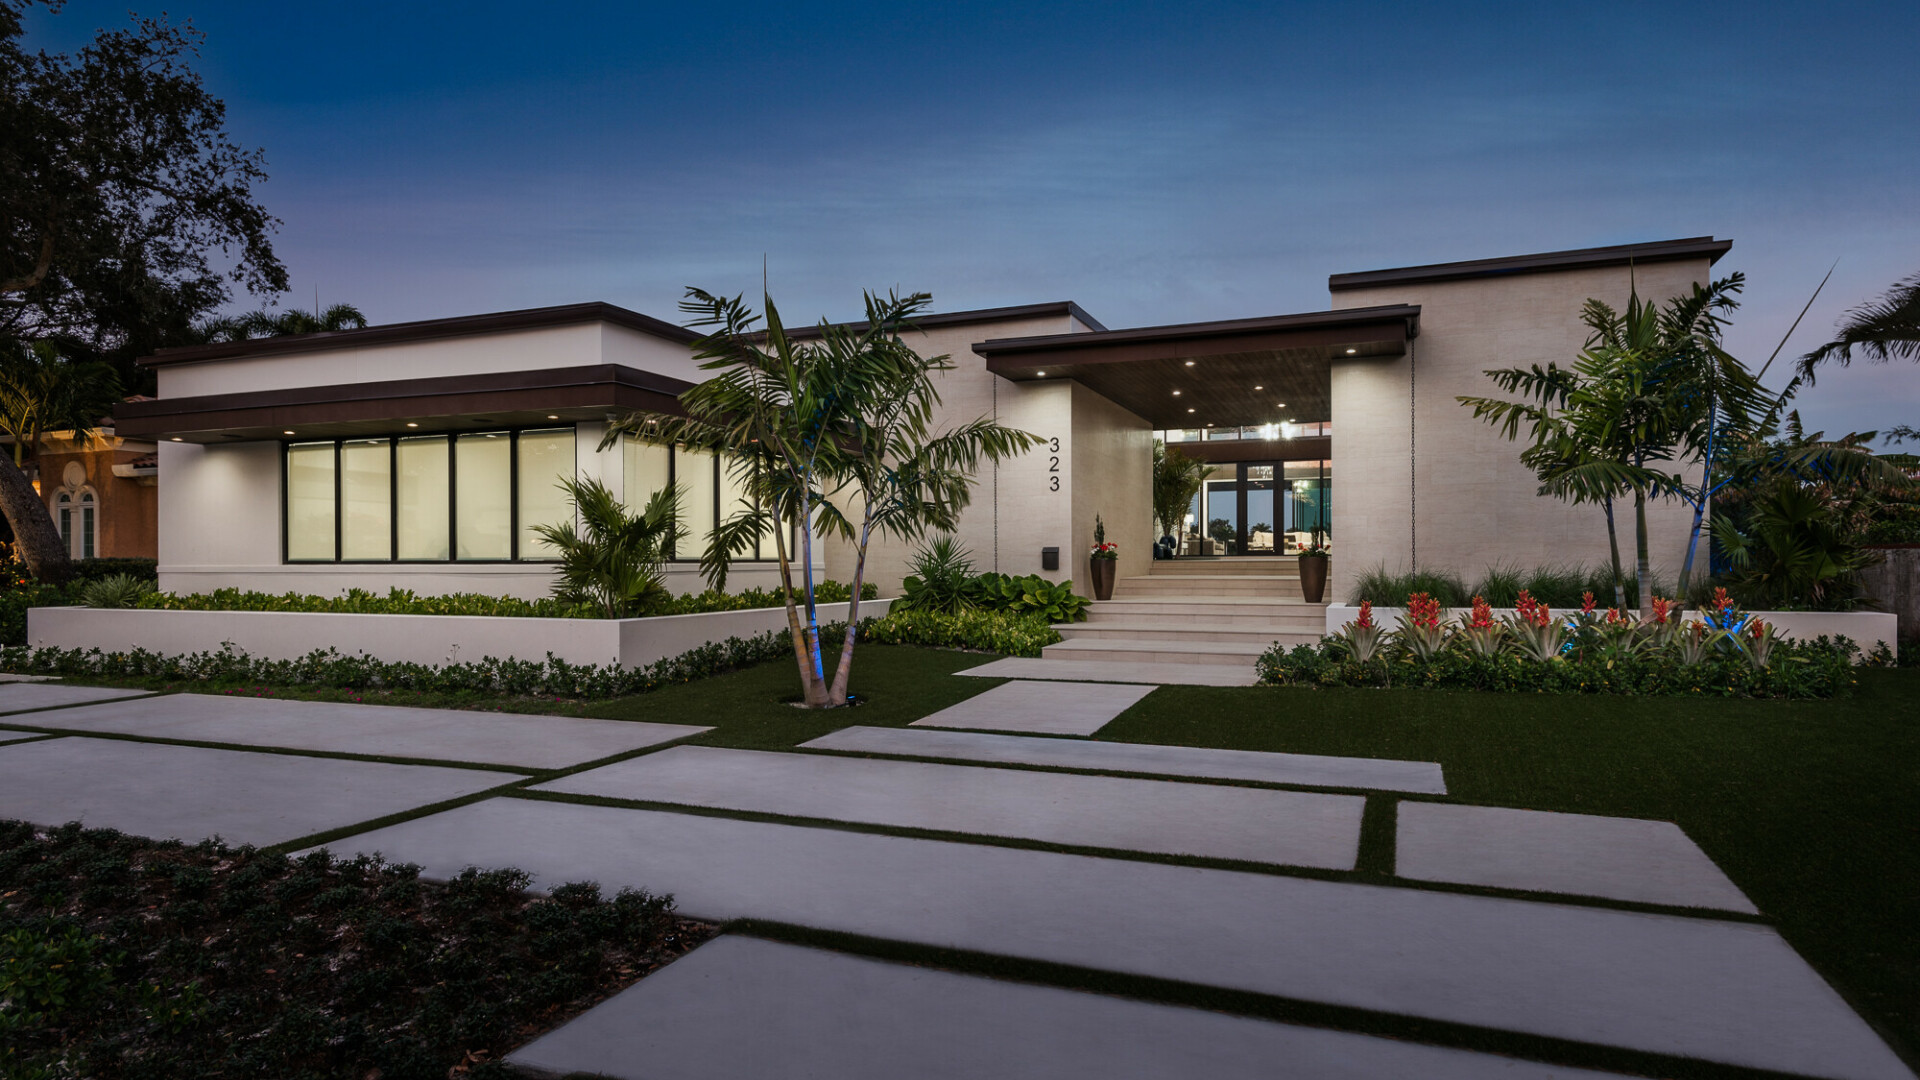 Front view of modern luxury home with a detailed walkway, Tampa FL